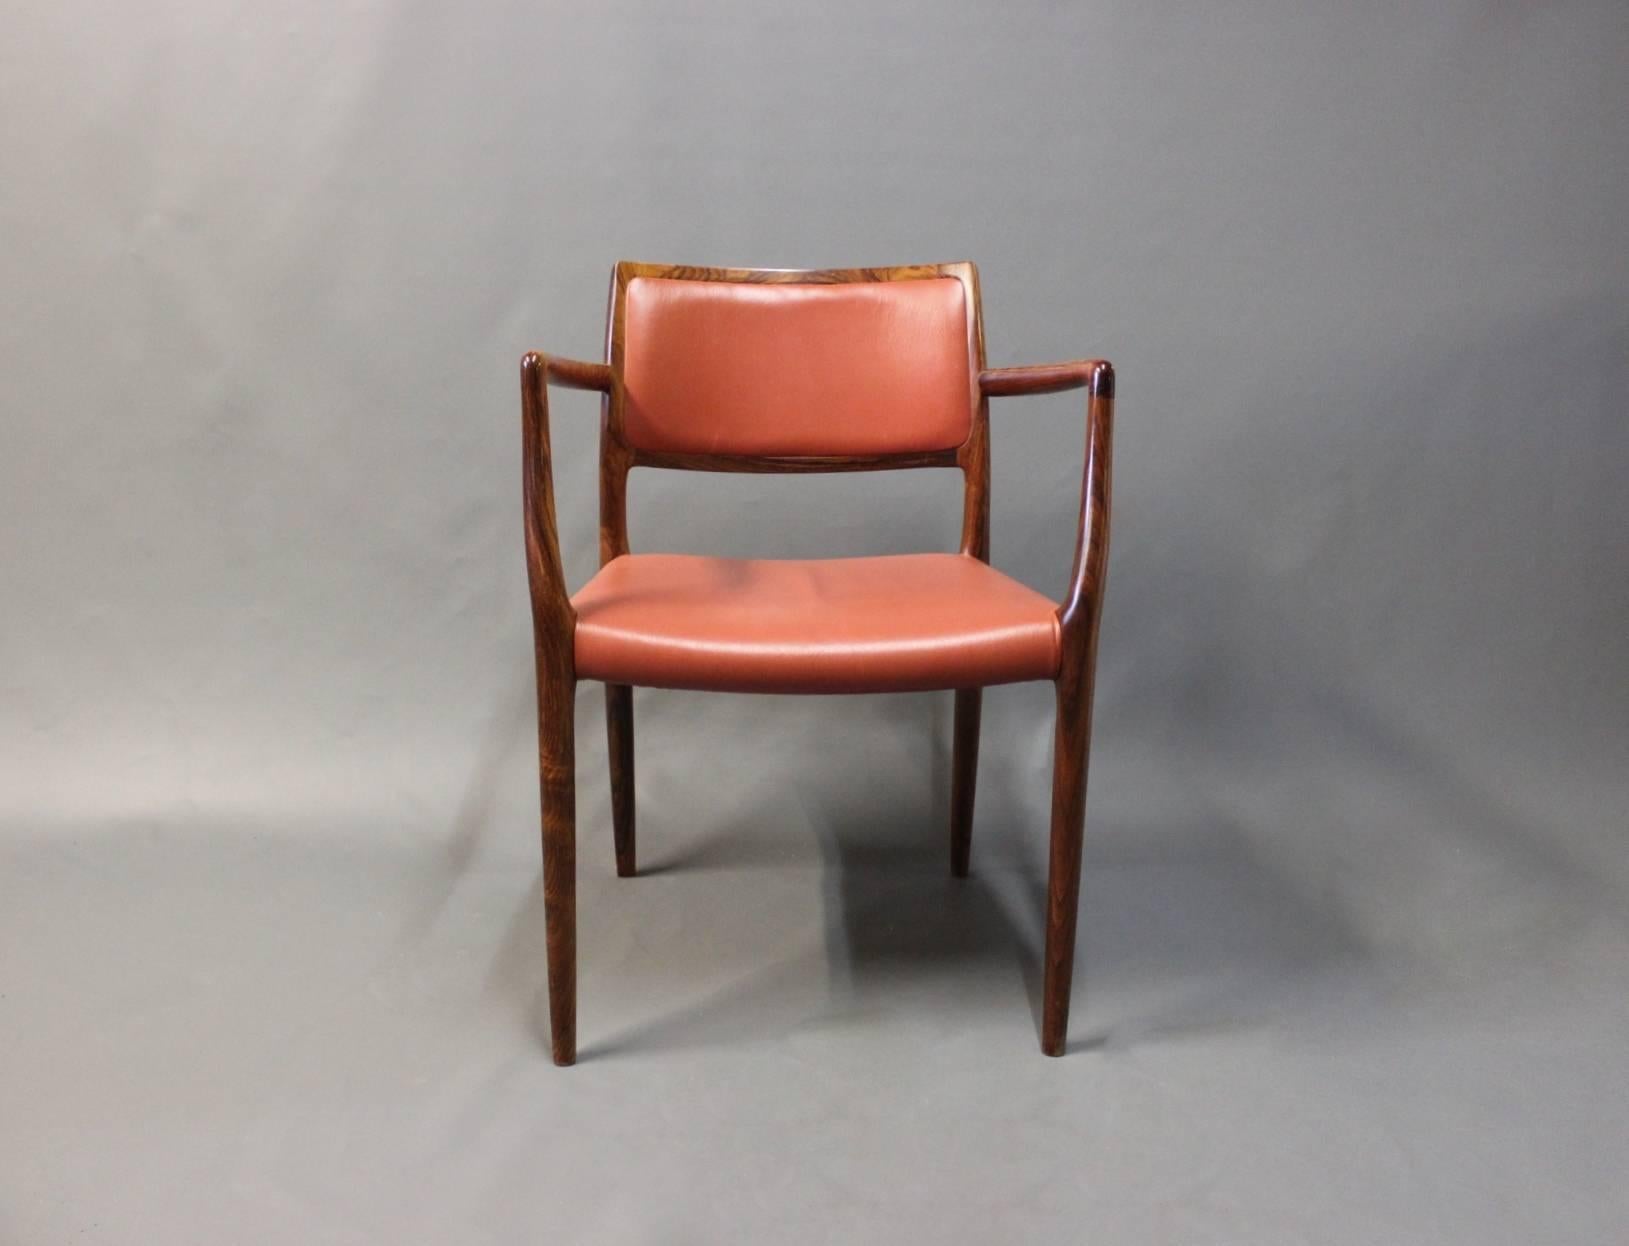 Armchair, model 65 manufactured by J.L. Moeller and designed by N.O. Moeller in 1968. The chair is in rosewood and red classic leather.